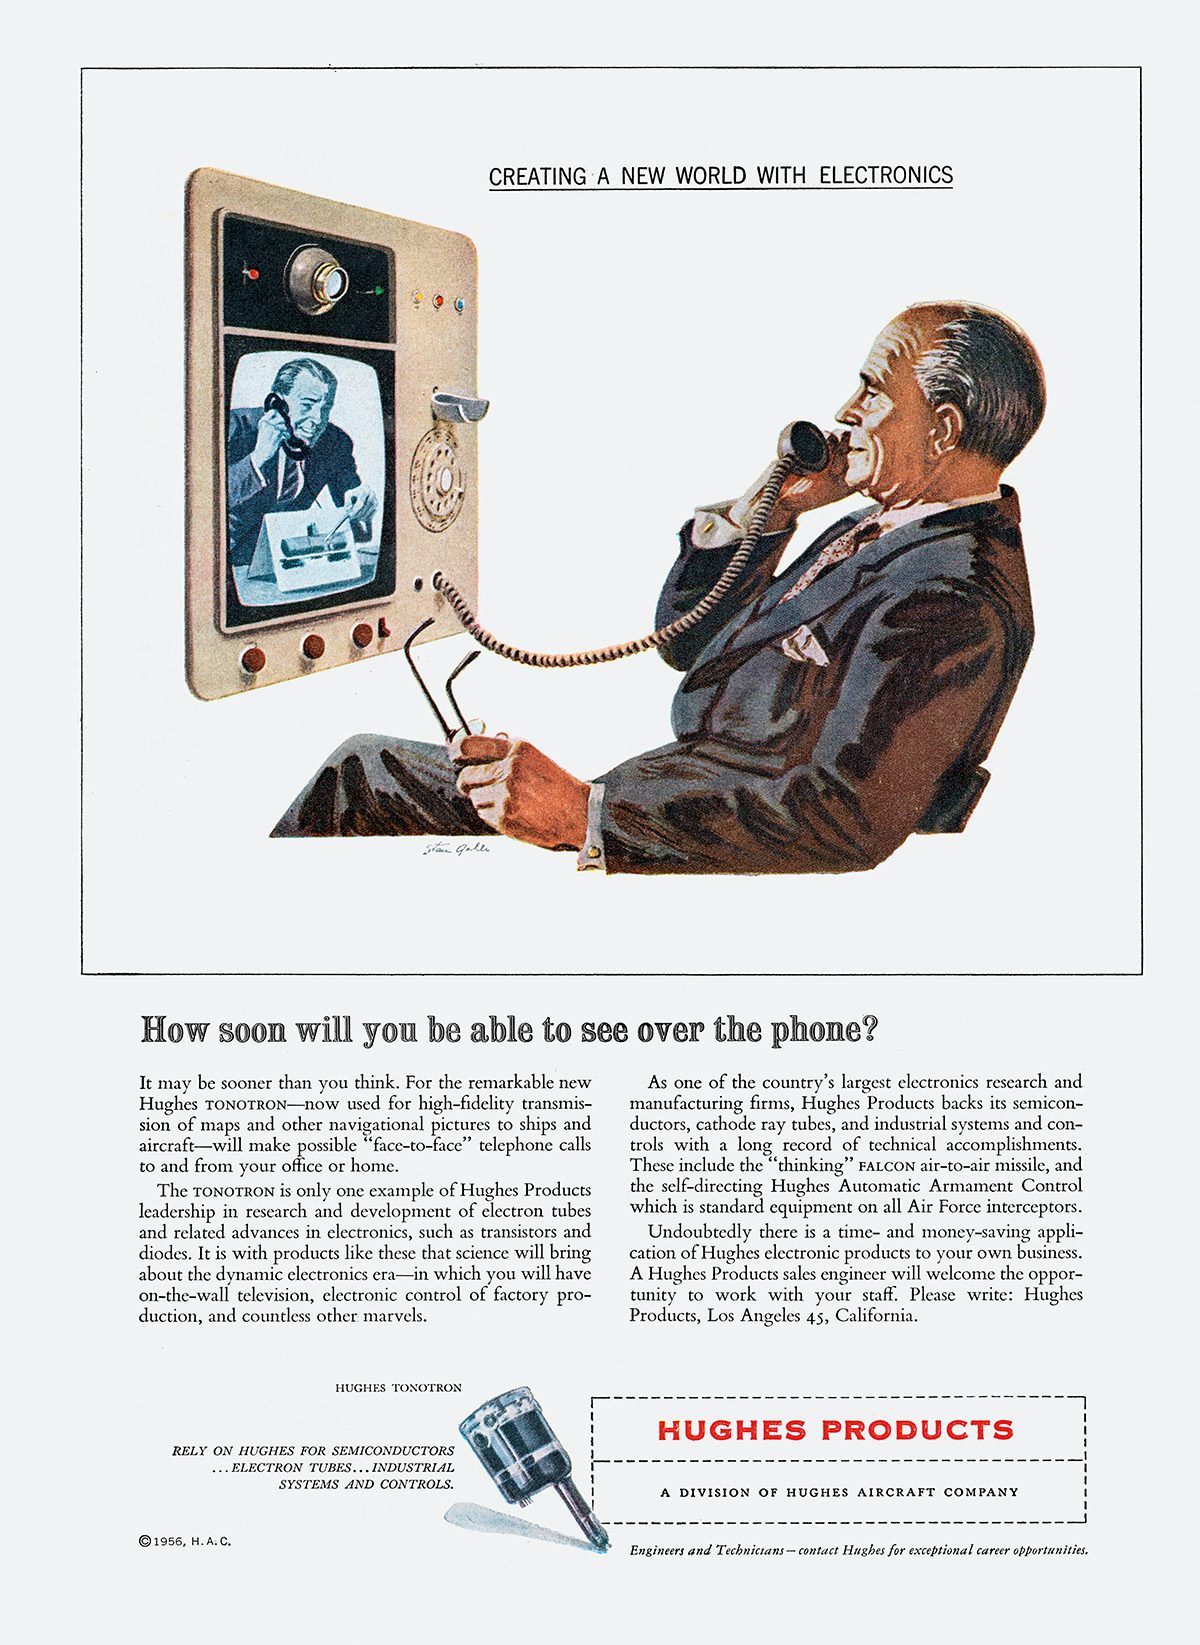 Image of a poster advertisement showing an illustration of a man in a suit holding a phone to his ear as he looks at a screen. The poster is headlined 'How soon will you be able to see over the phone?'